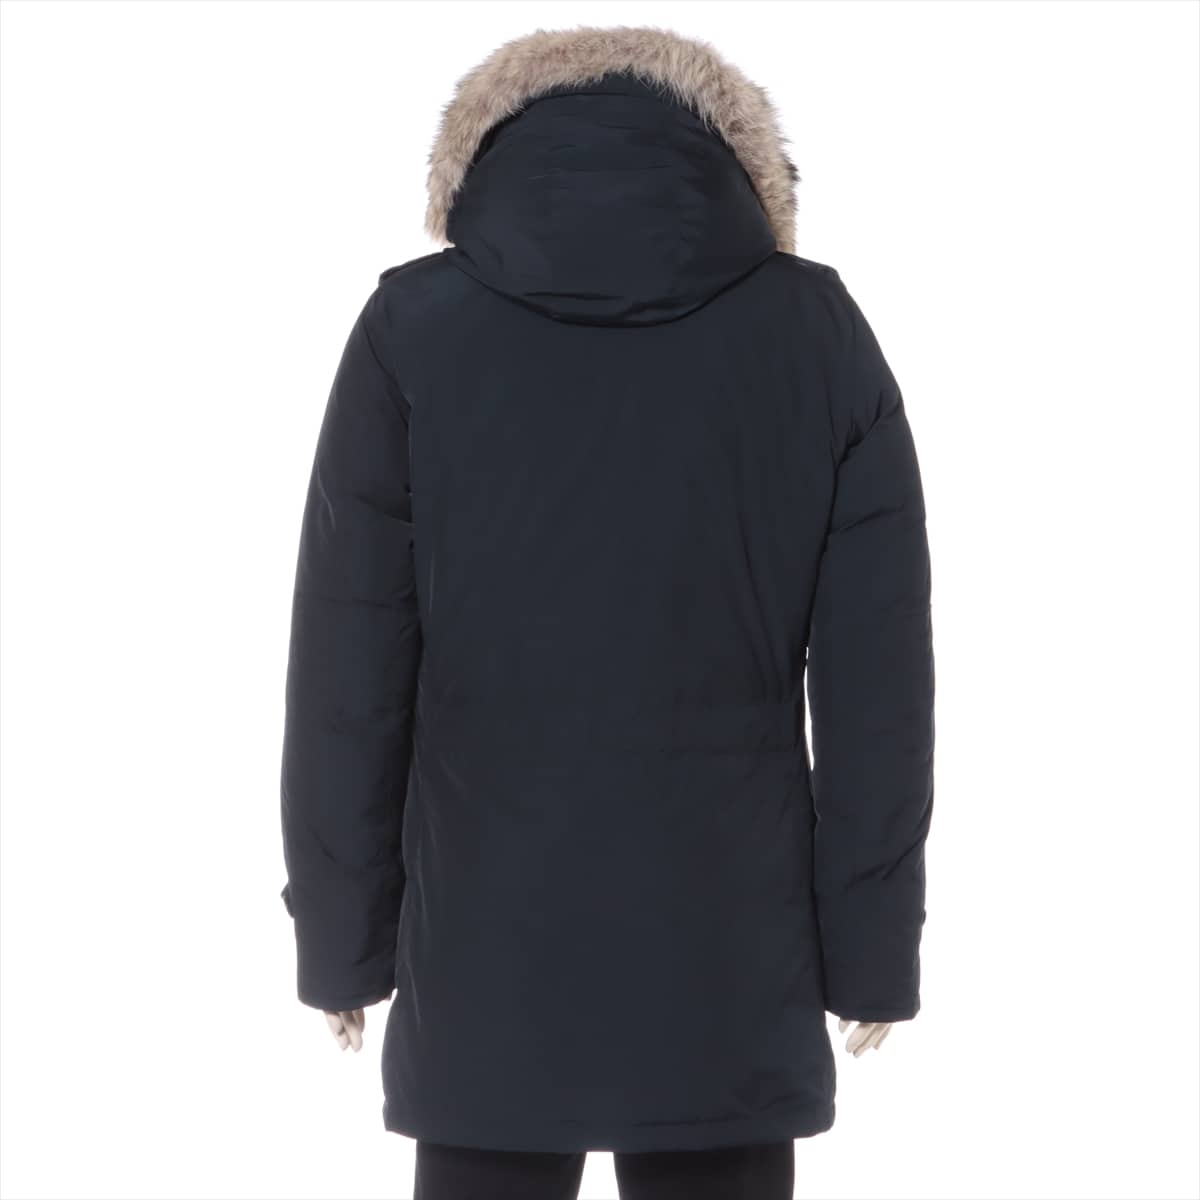 Woolrich Polyester & nylon Down coat S Men's Navy blue  Removable fur